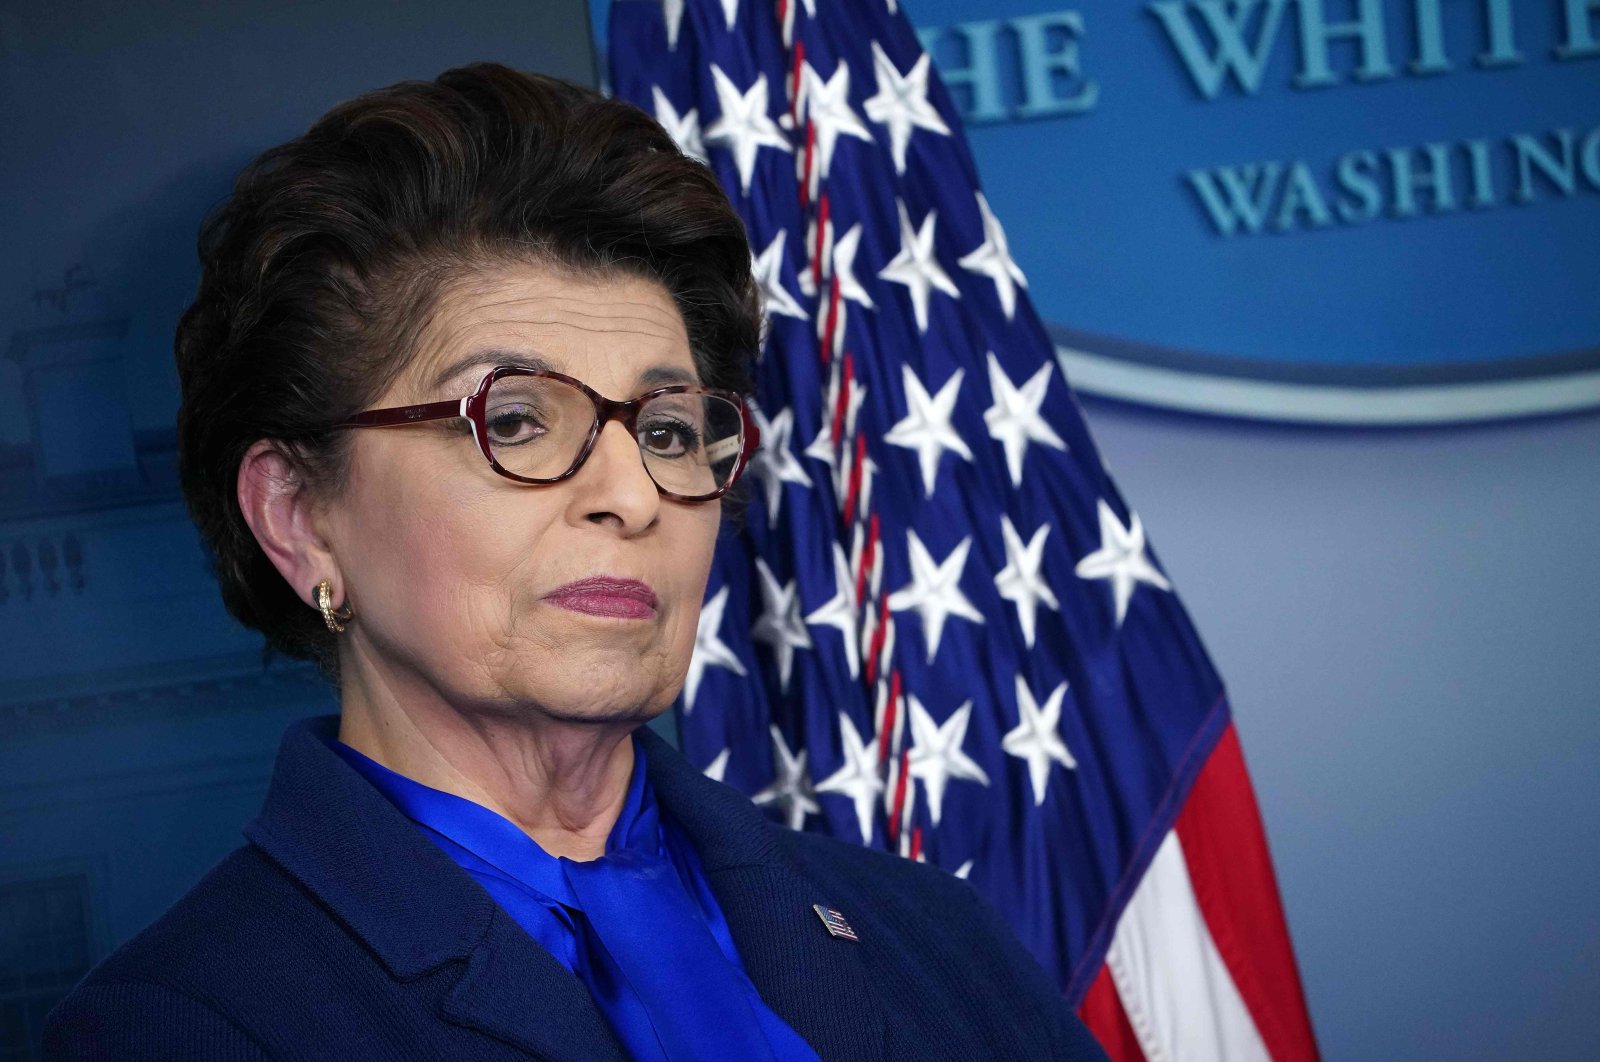 In this file photo taken on April 02, 2020, the Administrator of the Small Business Administration Jovita Carranza attends the daily briefing on the novel coronavirus in the Brady Briefing Room at the White House in Washington, DC. (AFP Photo)